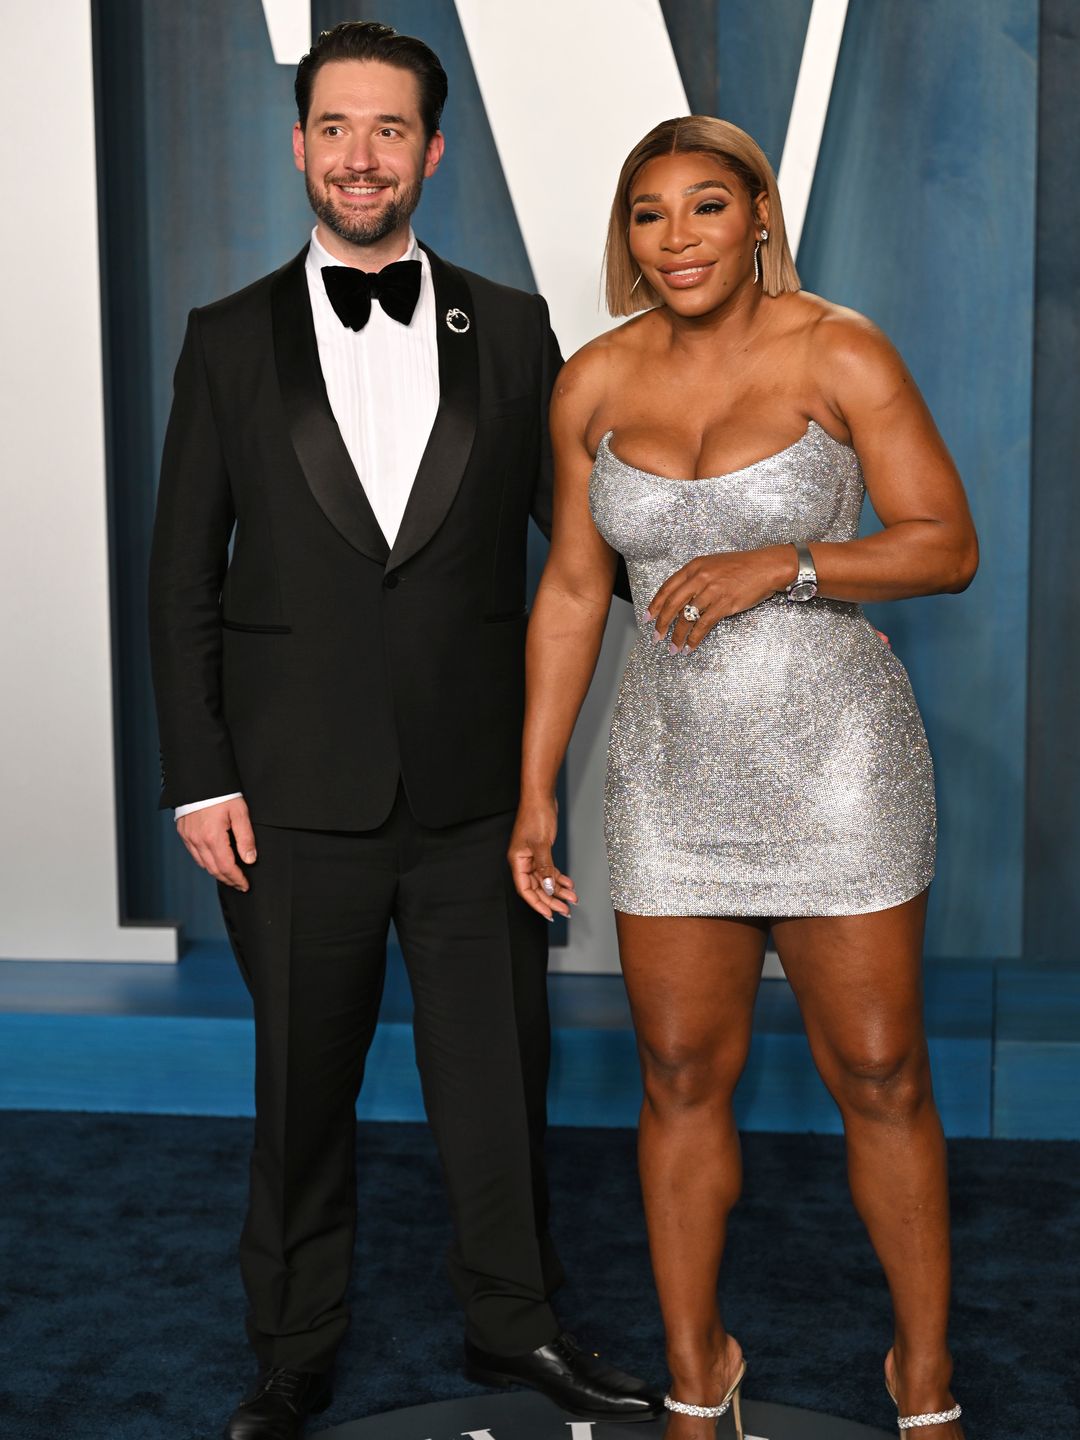 Serena Williams and Alexis Ohanian smiling at the Oscars afterparty in 2022